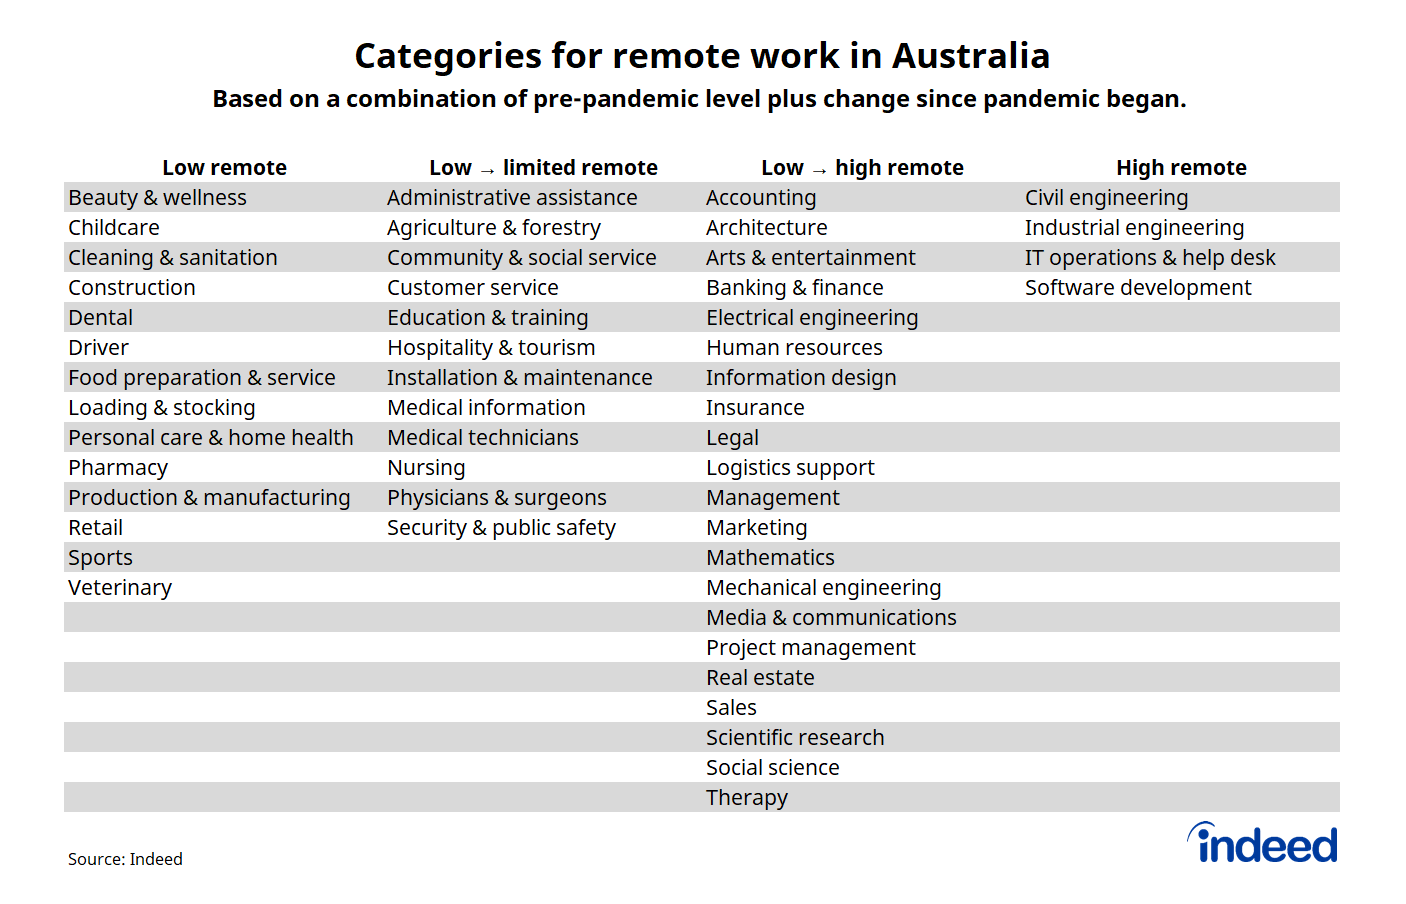 Table titled 'Categories for remote work in Australia' showing the four remote categories and their corresponding occupational sector. 